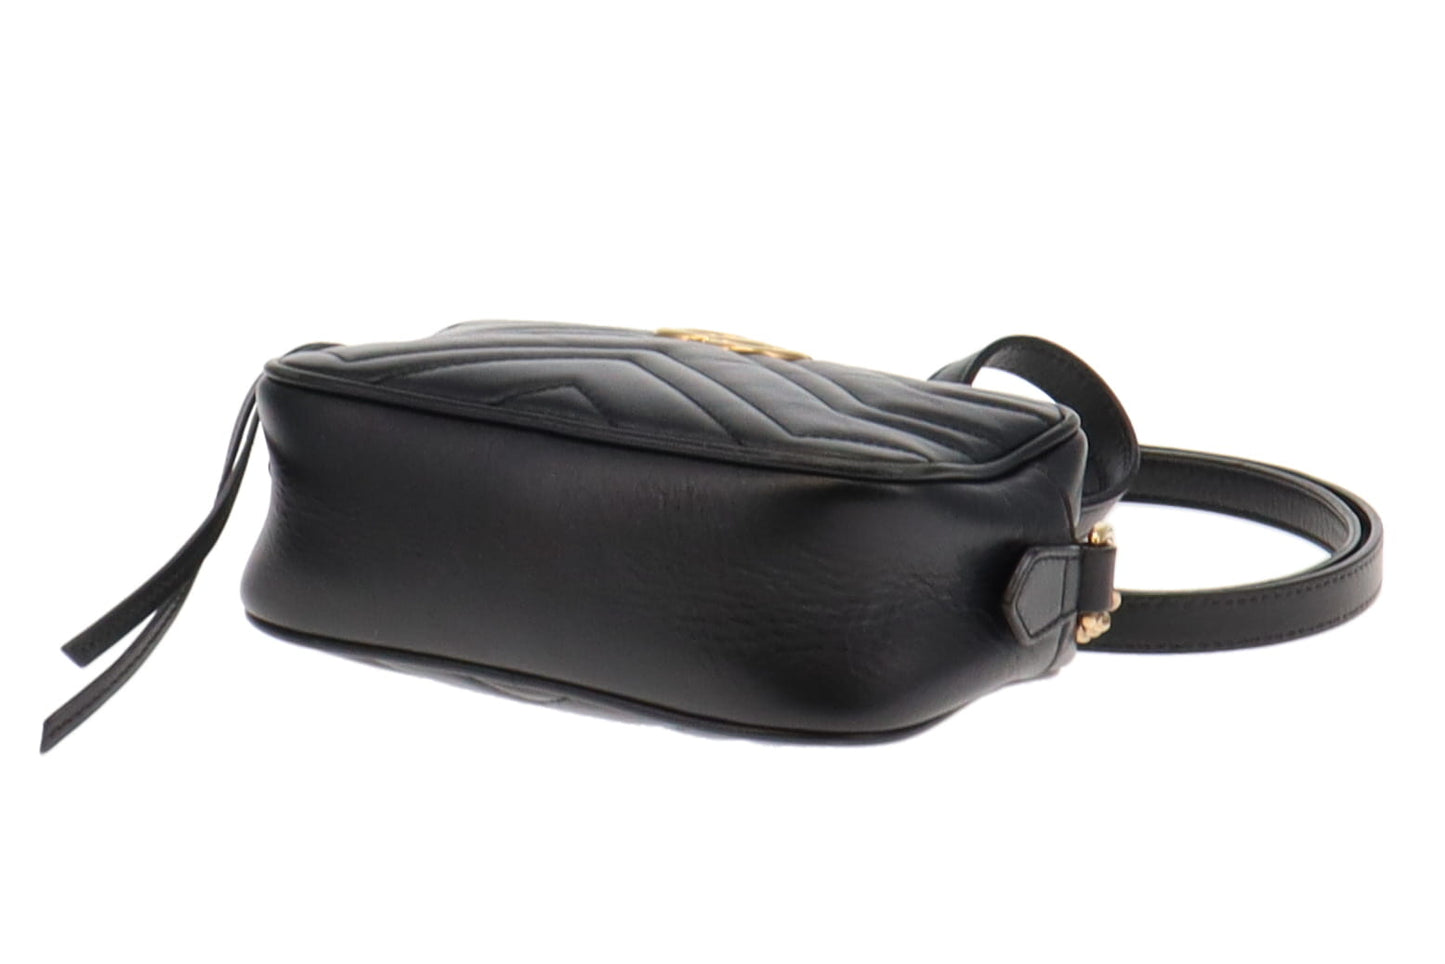 Gucci Black Quilted Leather Marmont Mini Camera Bag